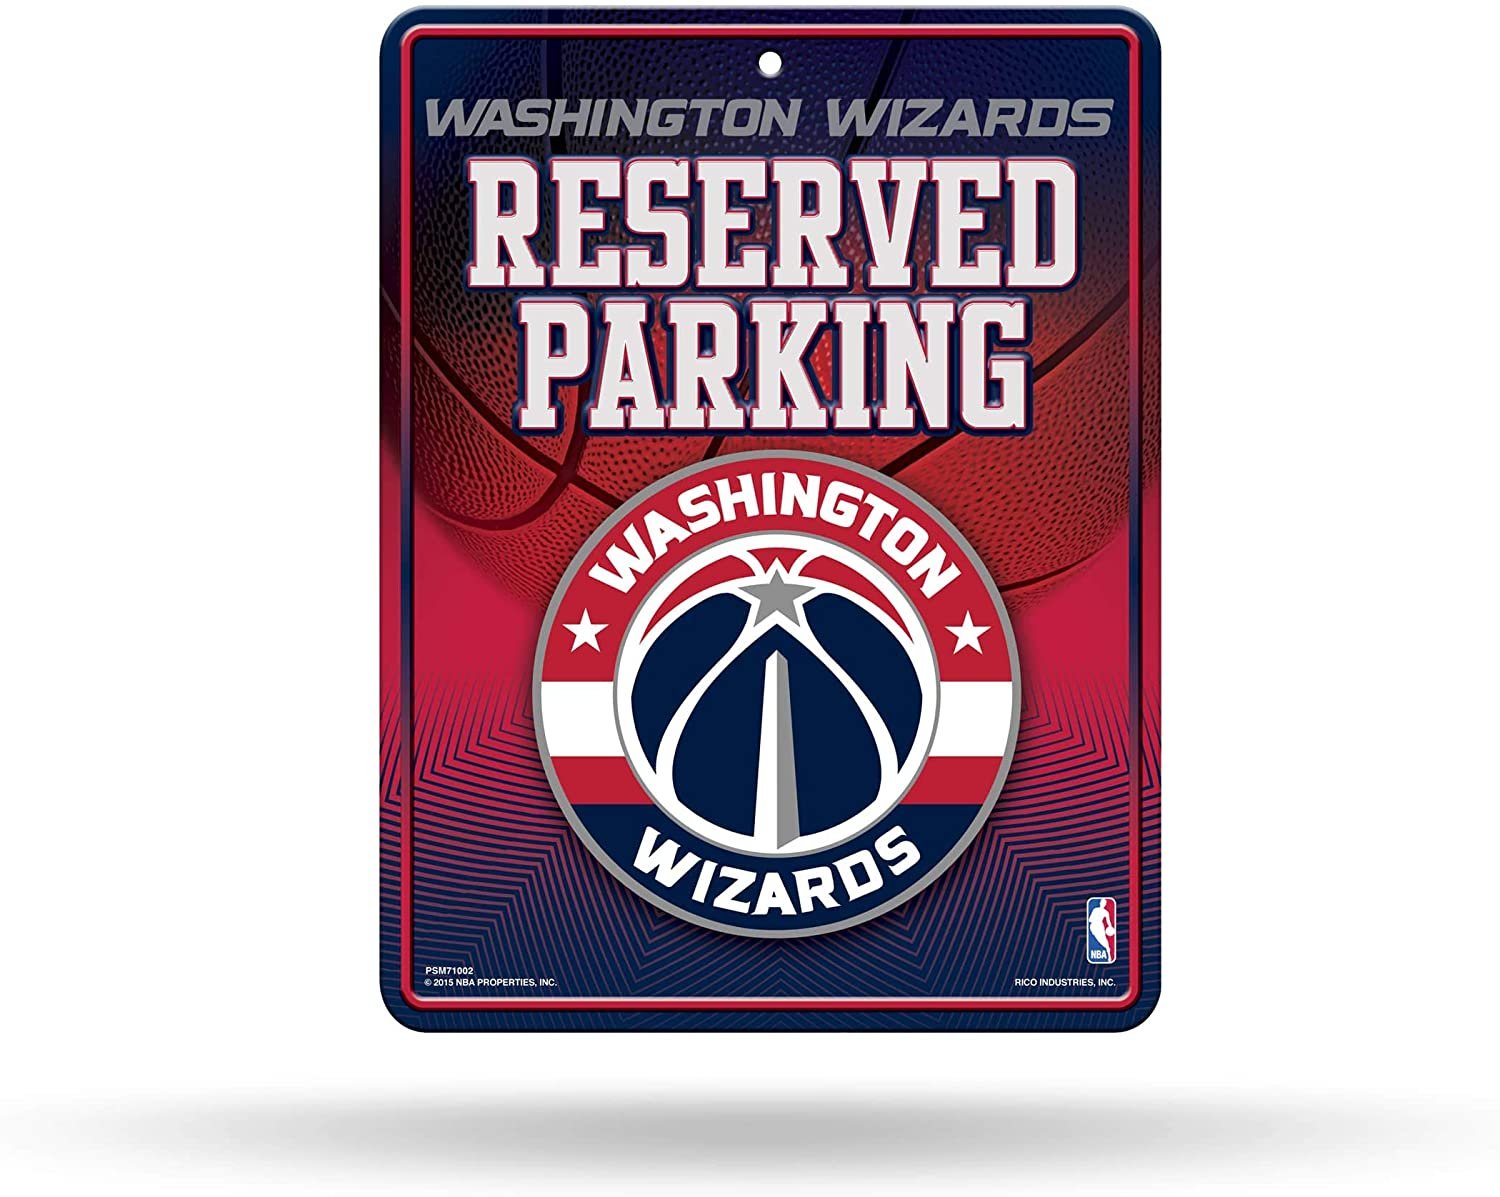 Washington Wizards 8.5-Inch by 11-Inch Metal Parking Sign Décor